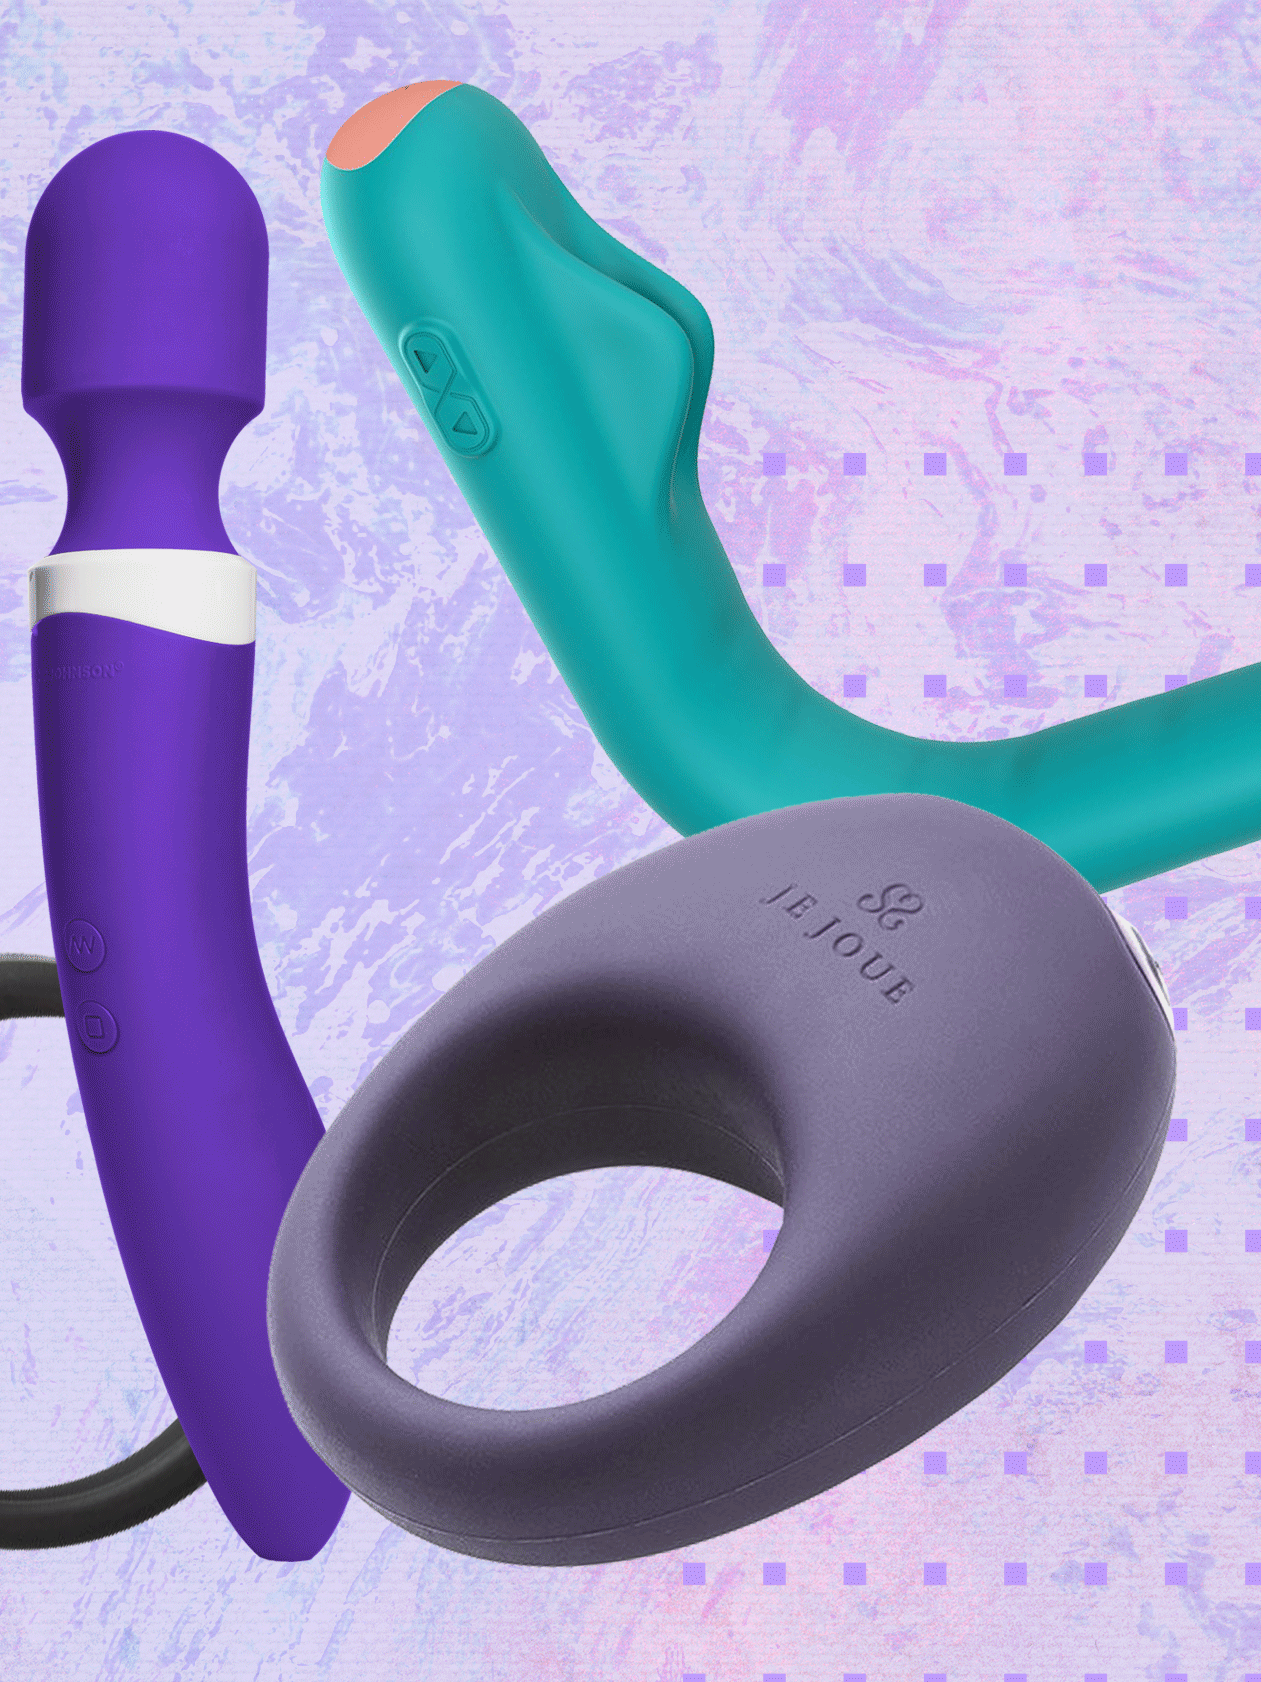 Prostate play ballsack cock rings lead